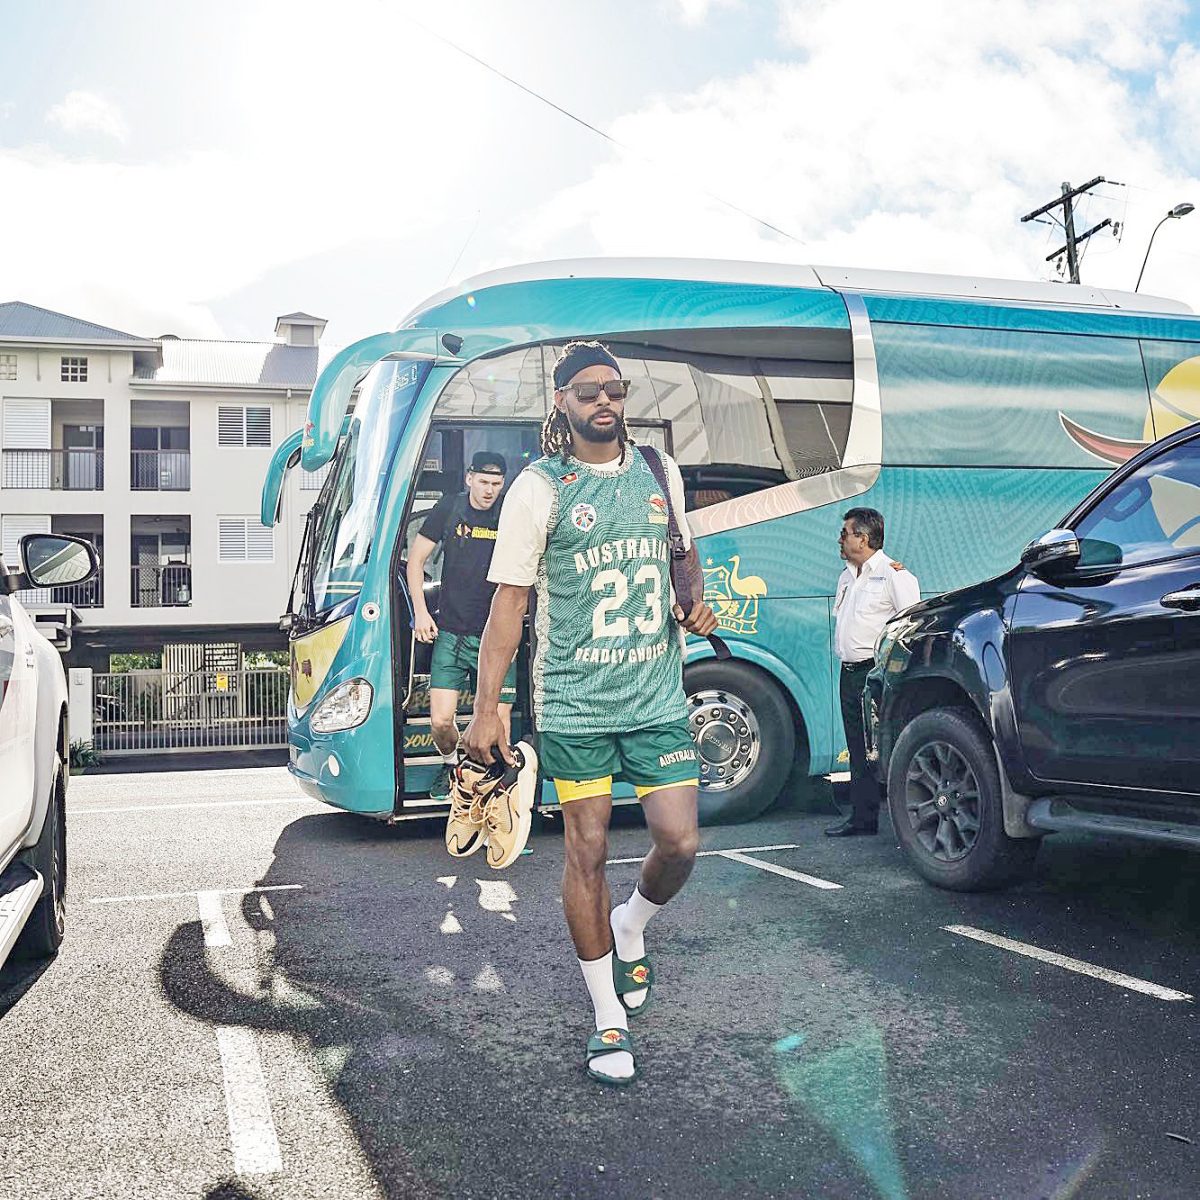 Patty Mills is a proud Torres Strait Islander and has instilled a ‘gold vibes only’ mantra in the squad. Picture: Matthew Adekponya.